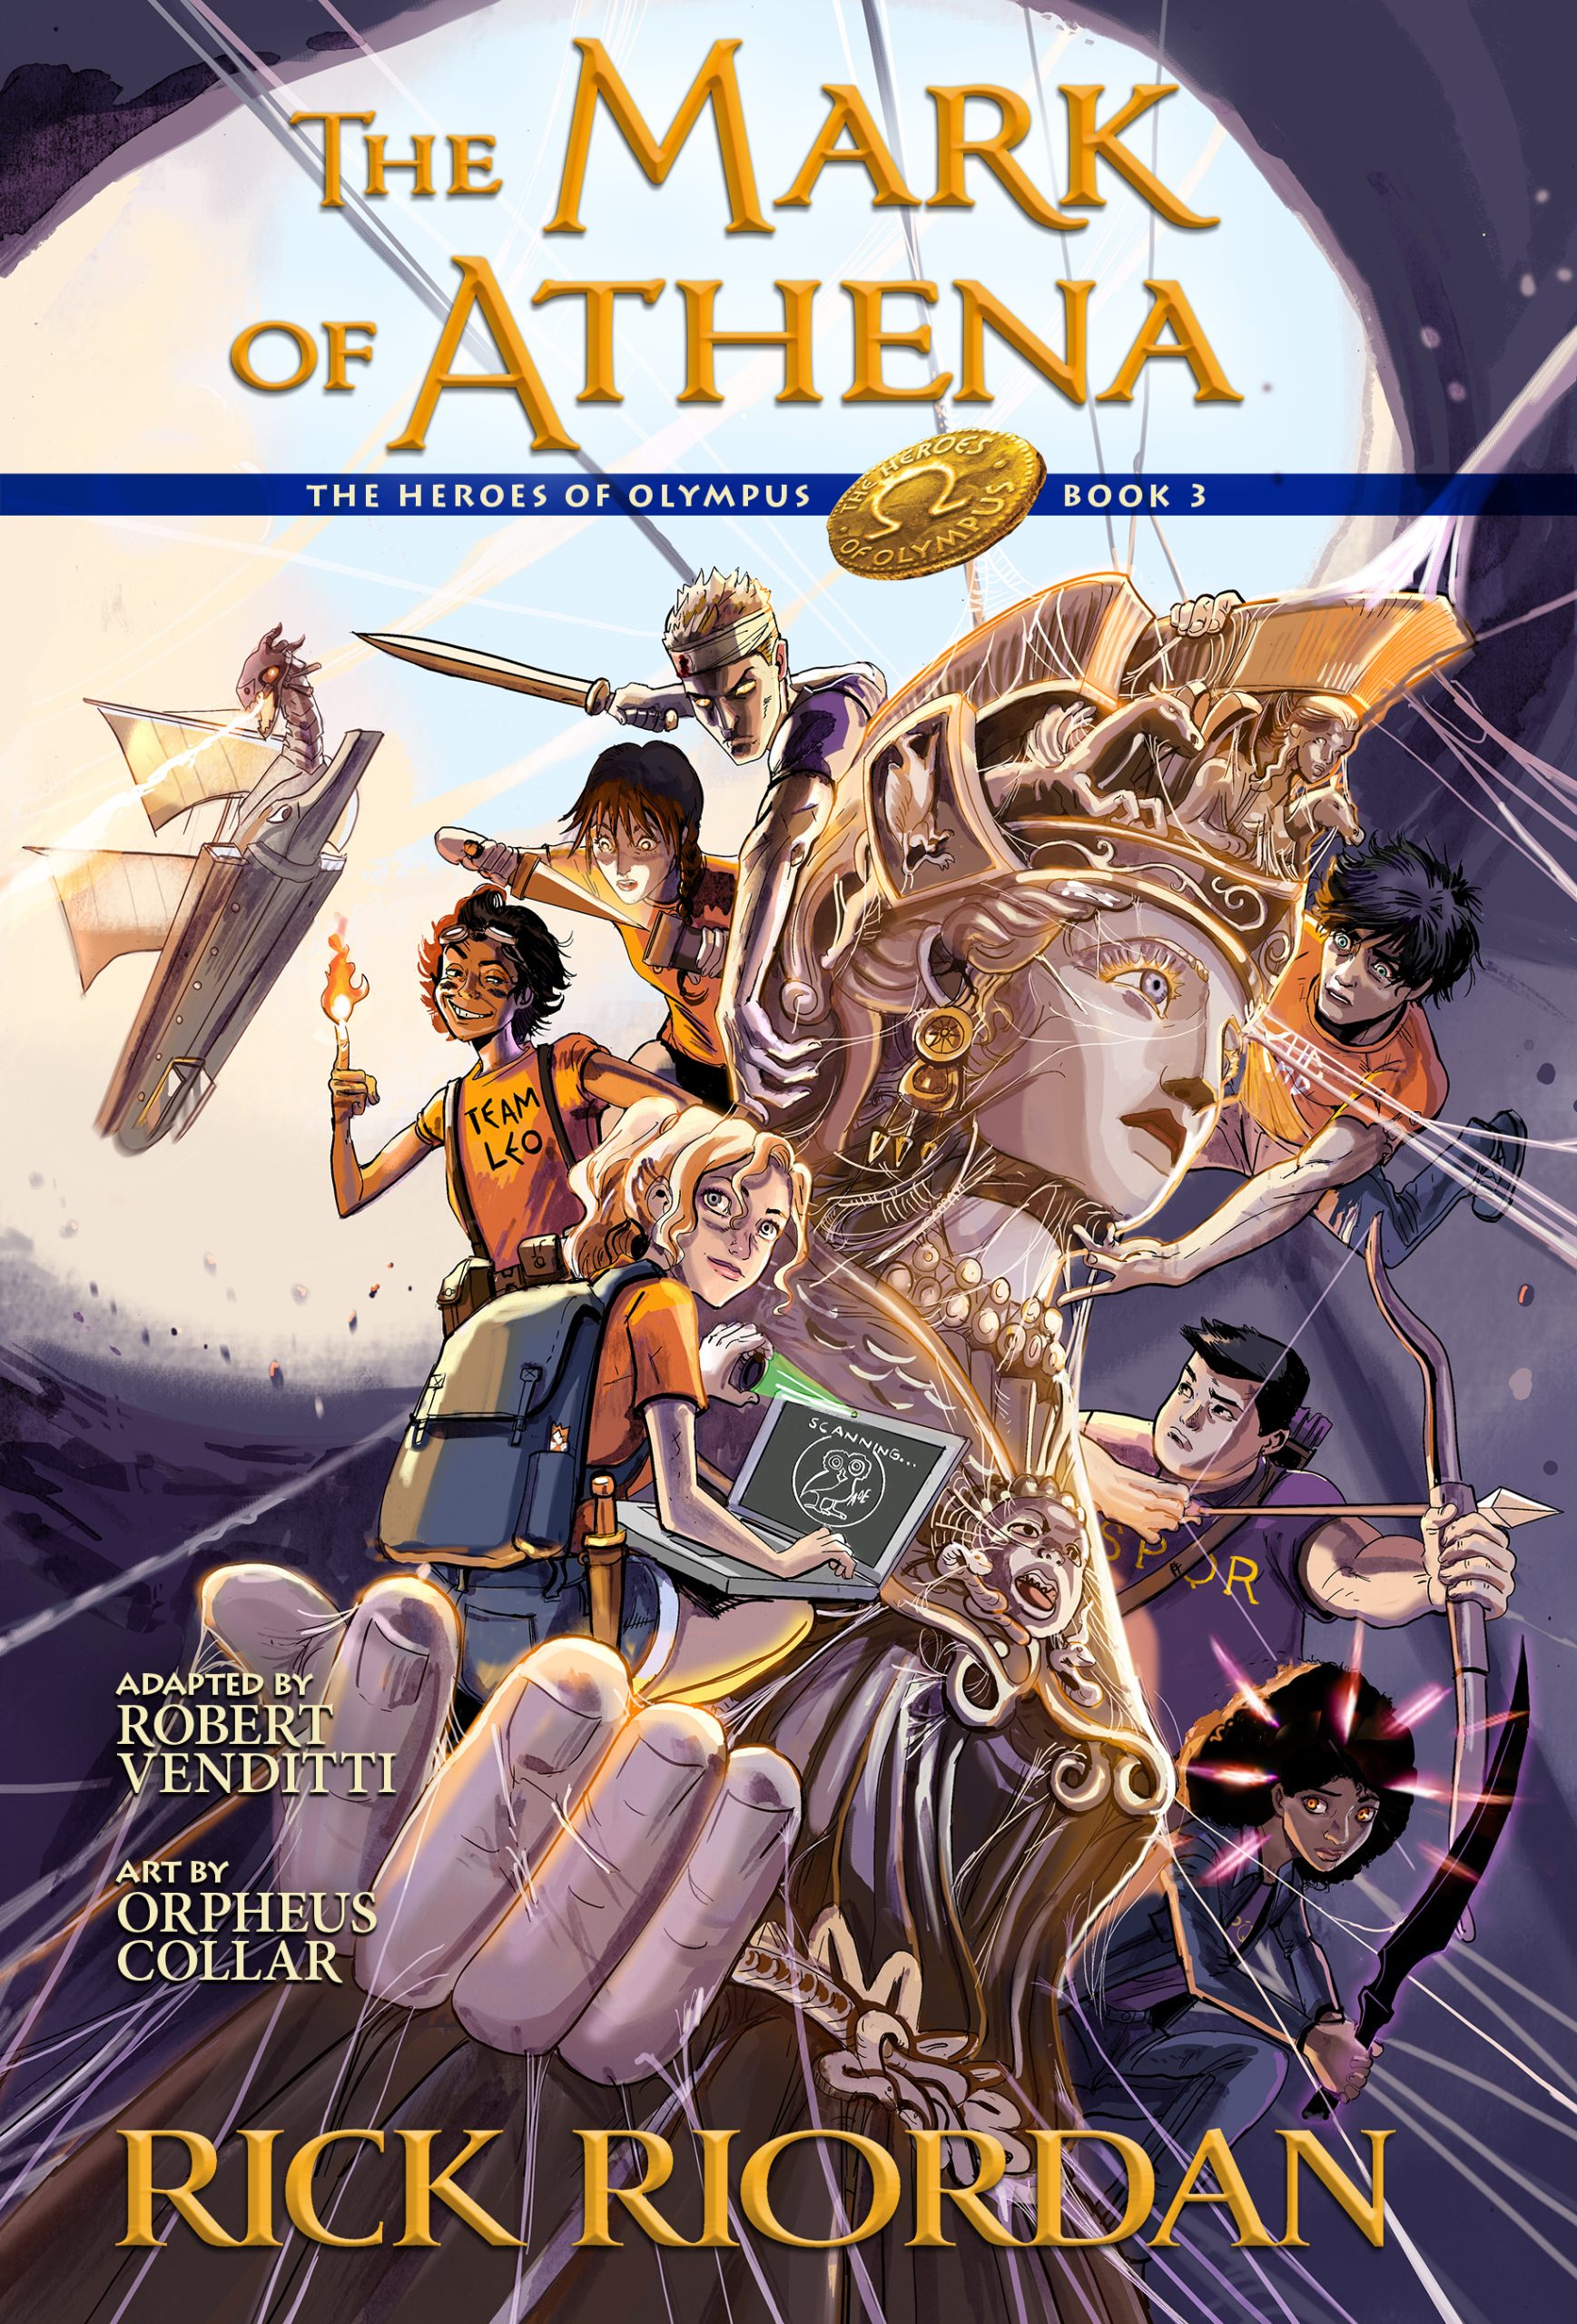 The Percy Jackson and the Olympians: Titan's Curse: The Graphic Novel (Percy  Jackson & the Olympians) (Paperback)